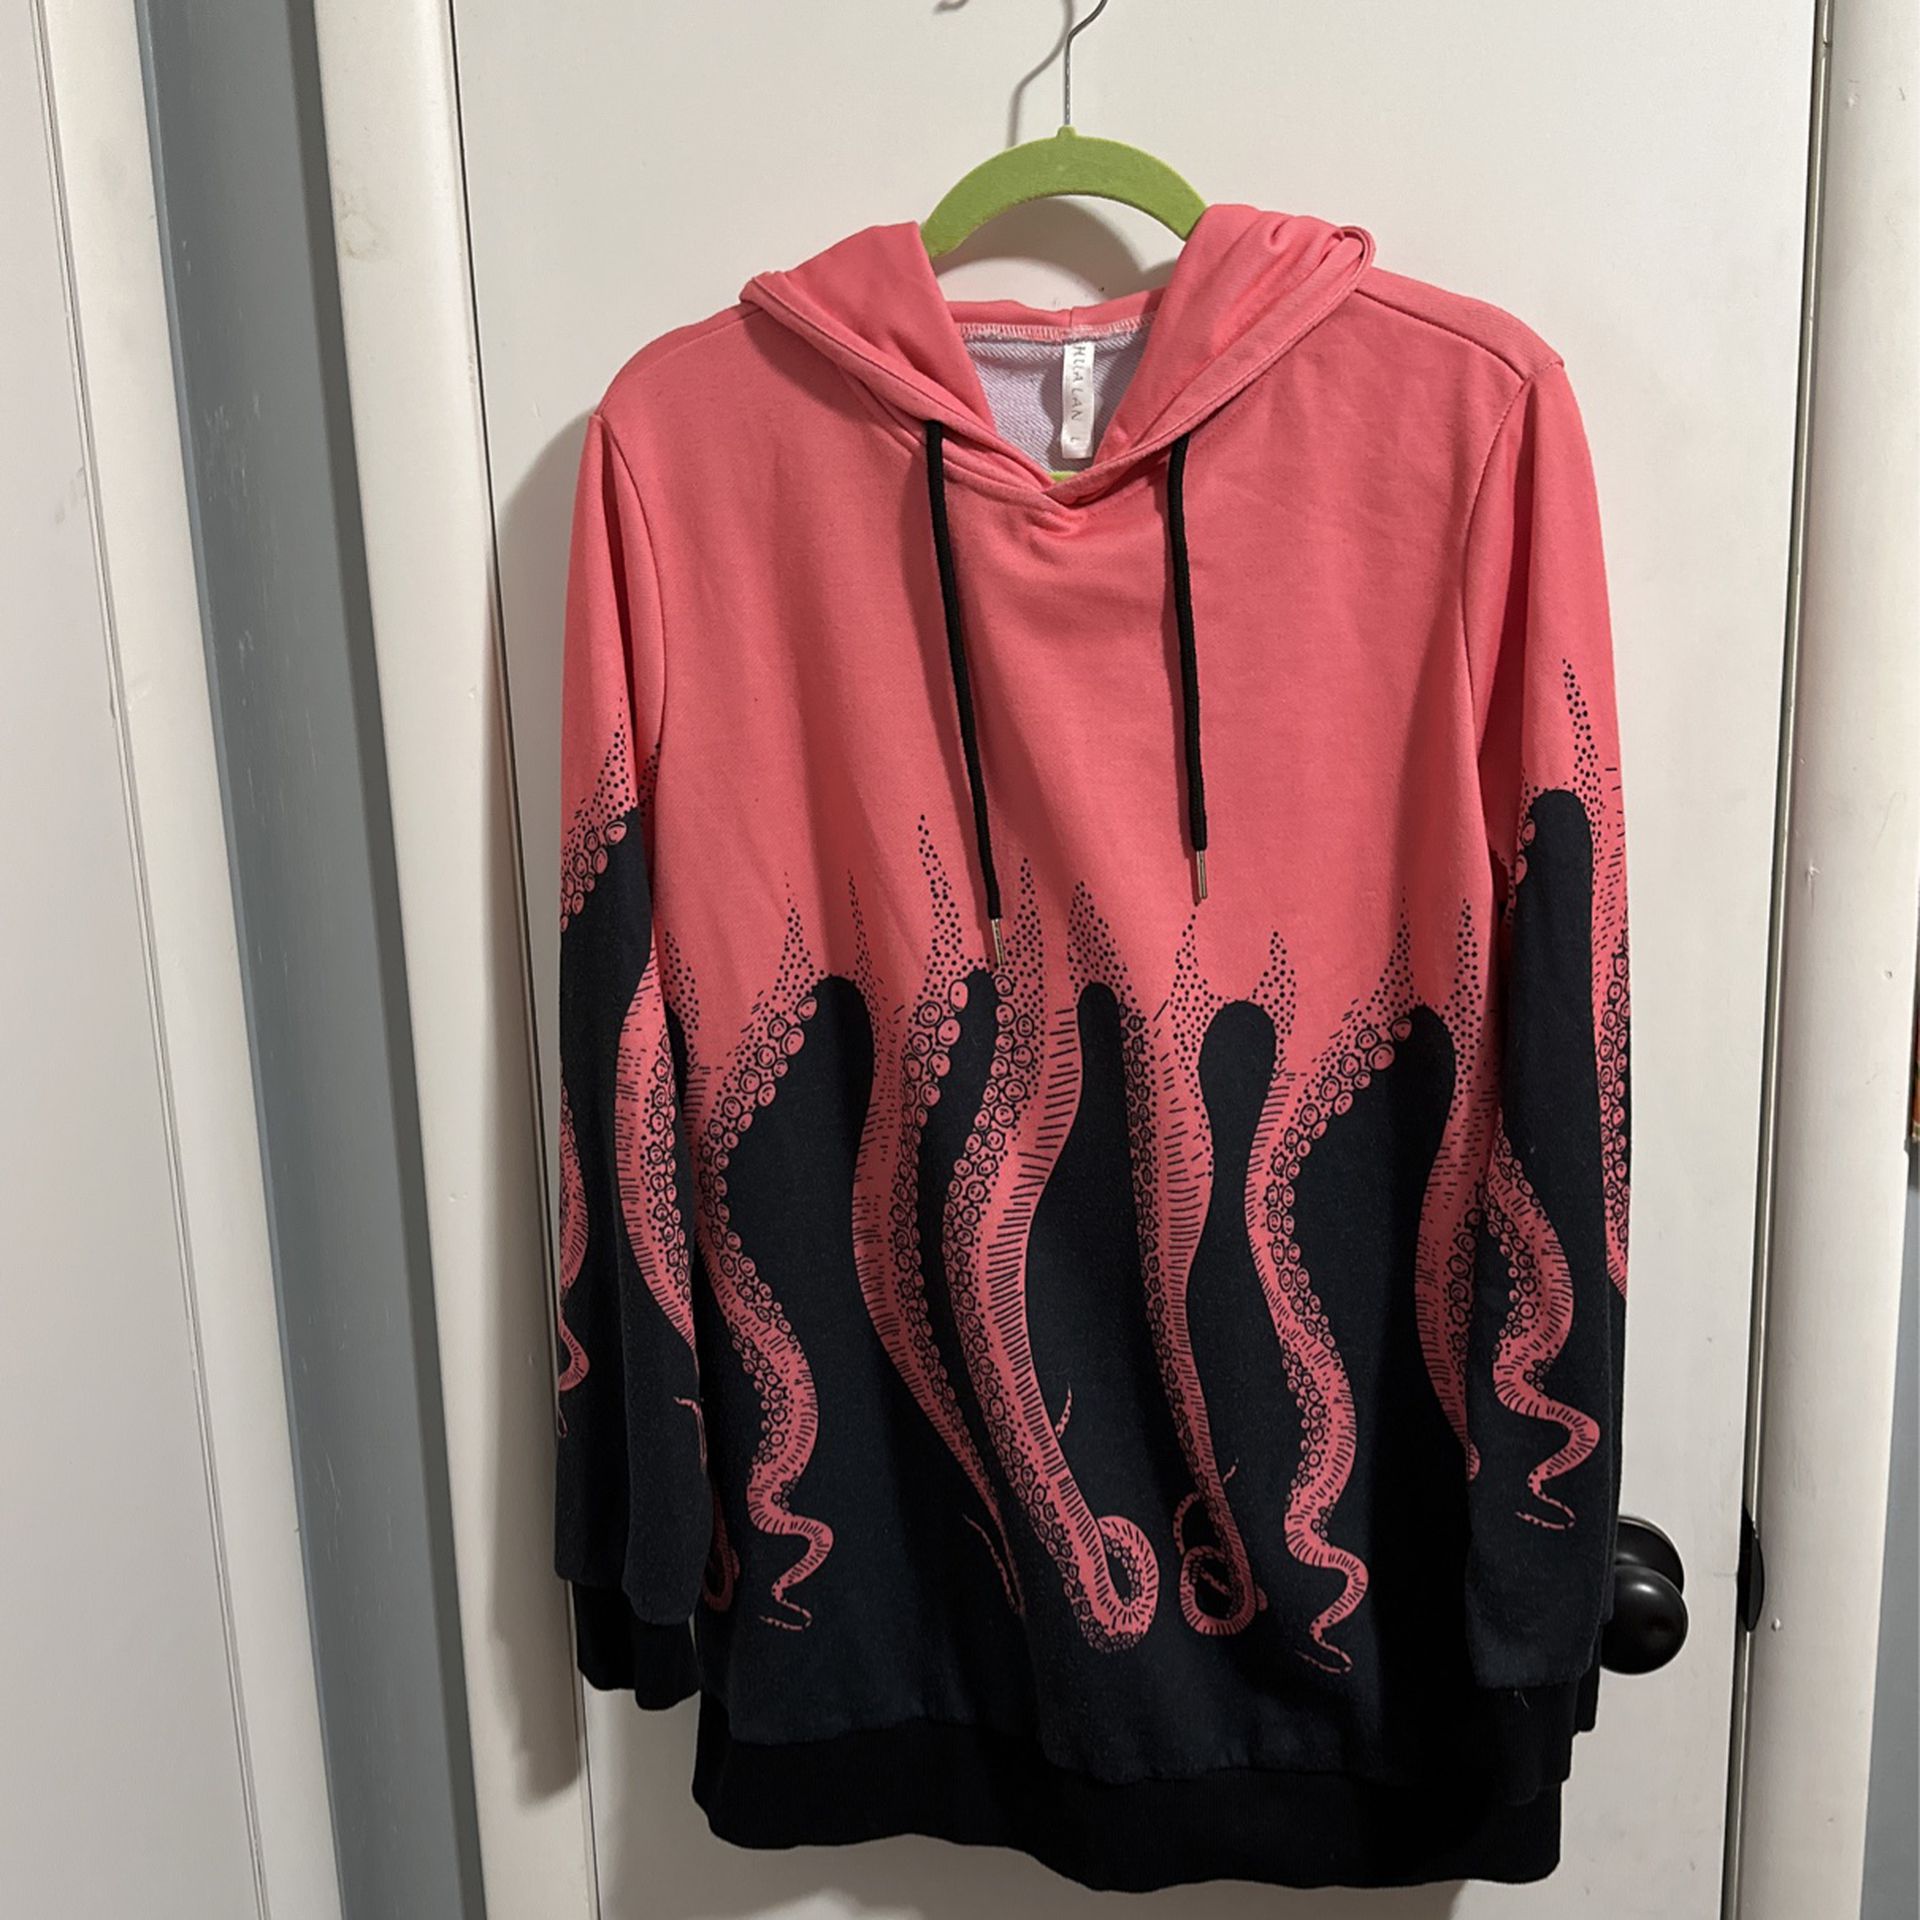 Long Sleeve Hoodie Size L Tag HUALAN Mellon Peach With Black Tentacles design